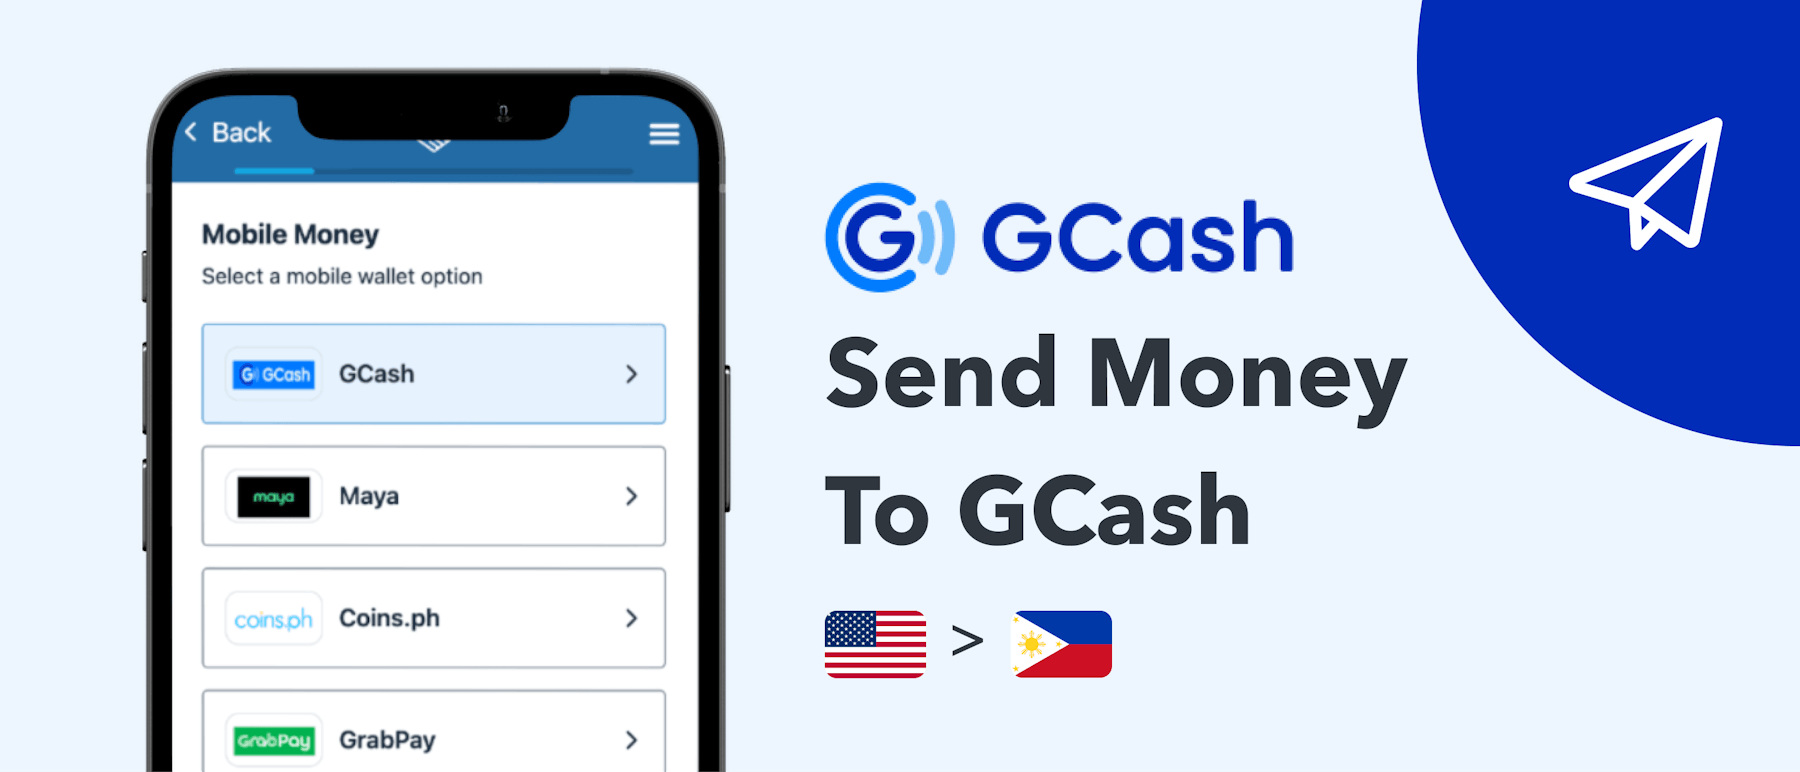 Send money to Gcash from the United States to the Philippines